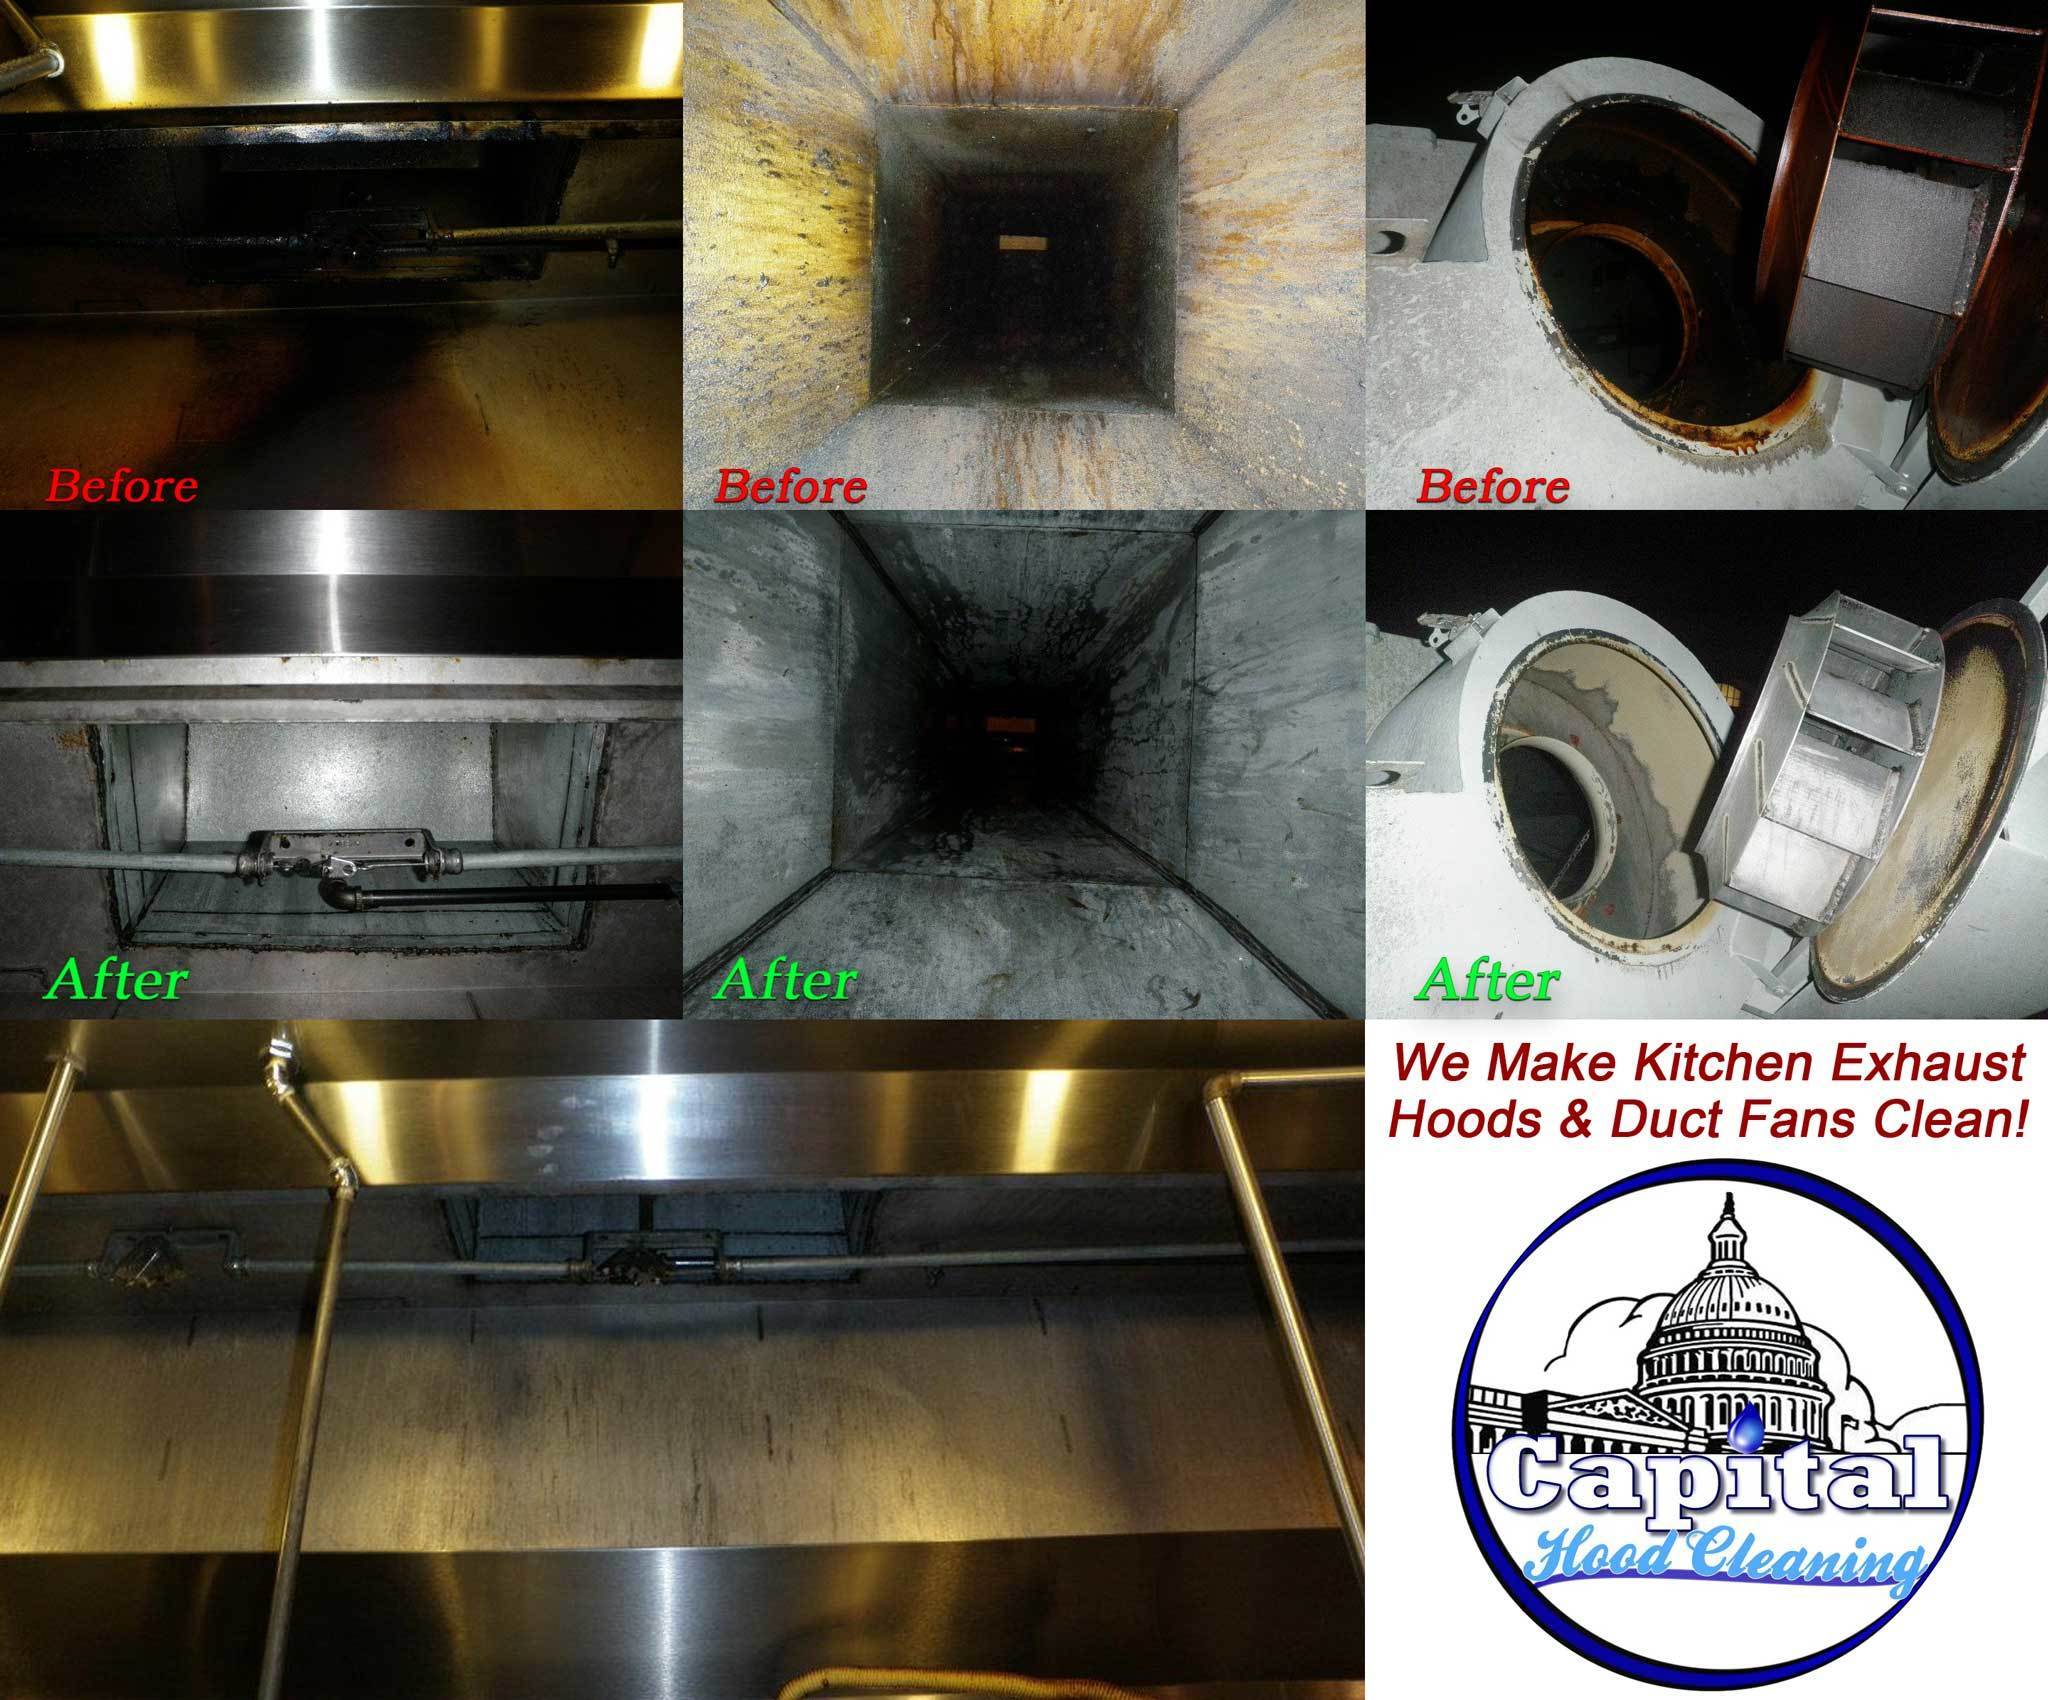 Hood Cleaning Service Commercial Kitchen Exhaust Fans